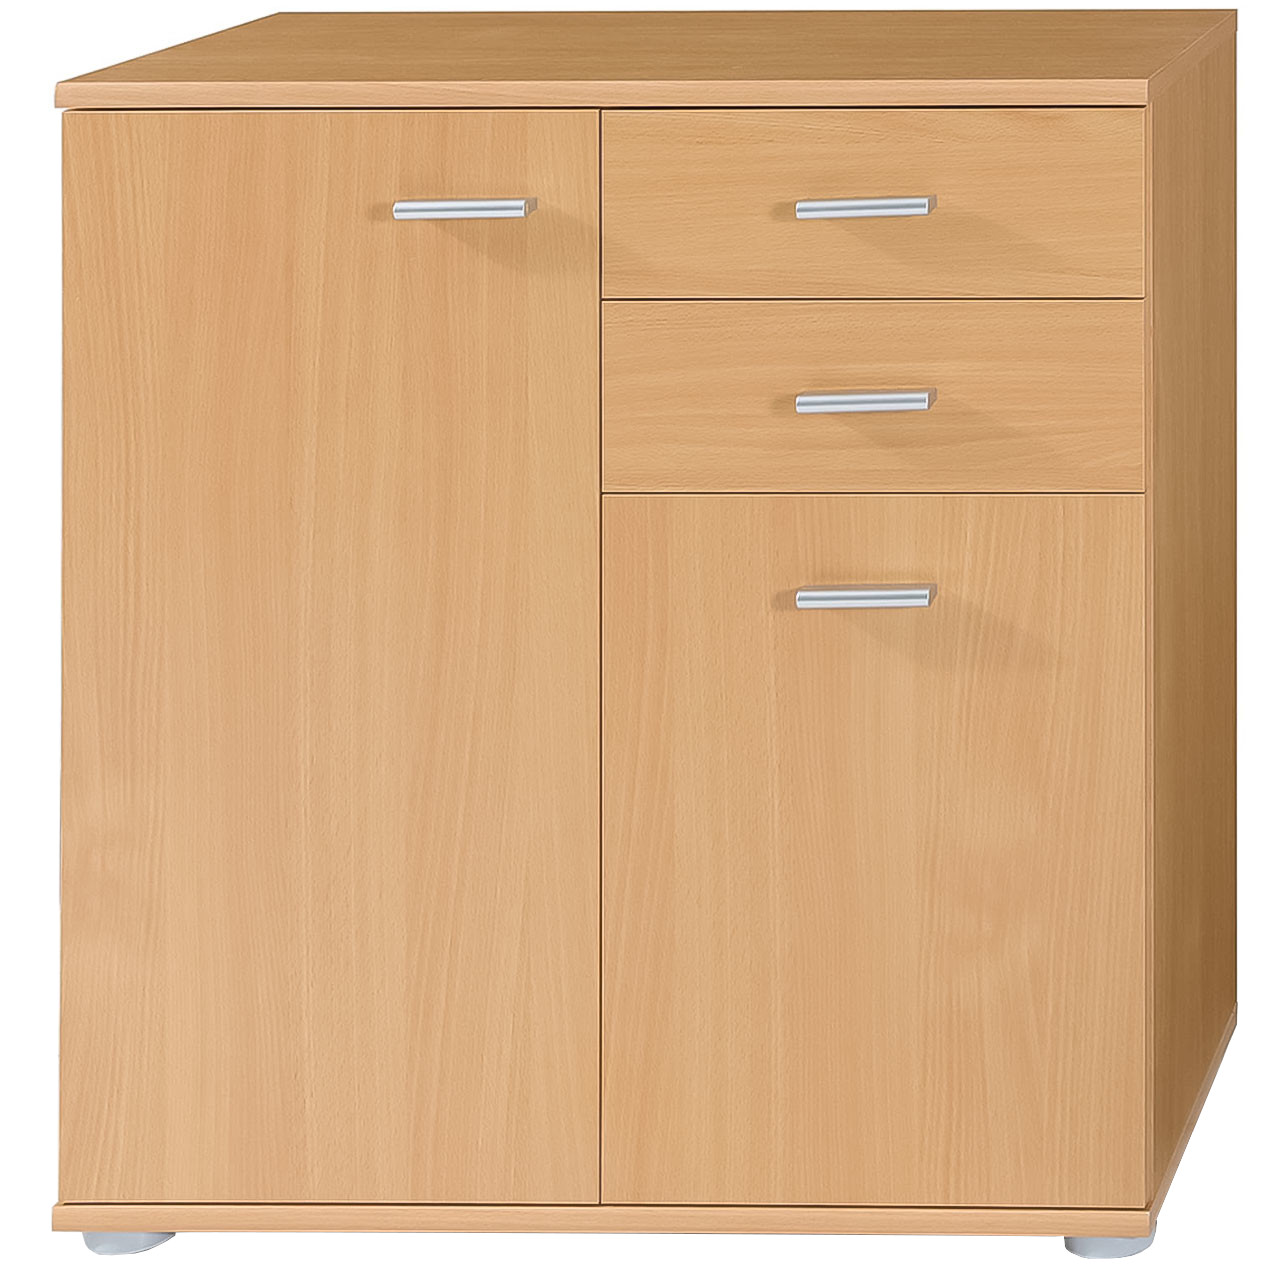 Storage cabinet MIKE 2 beech